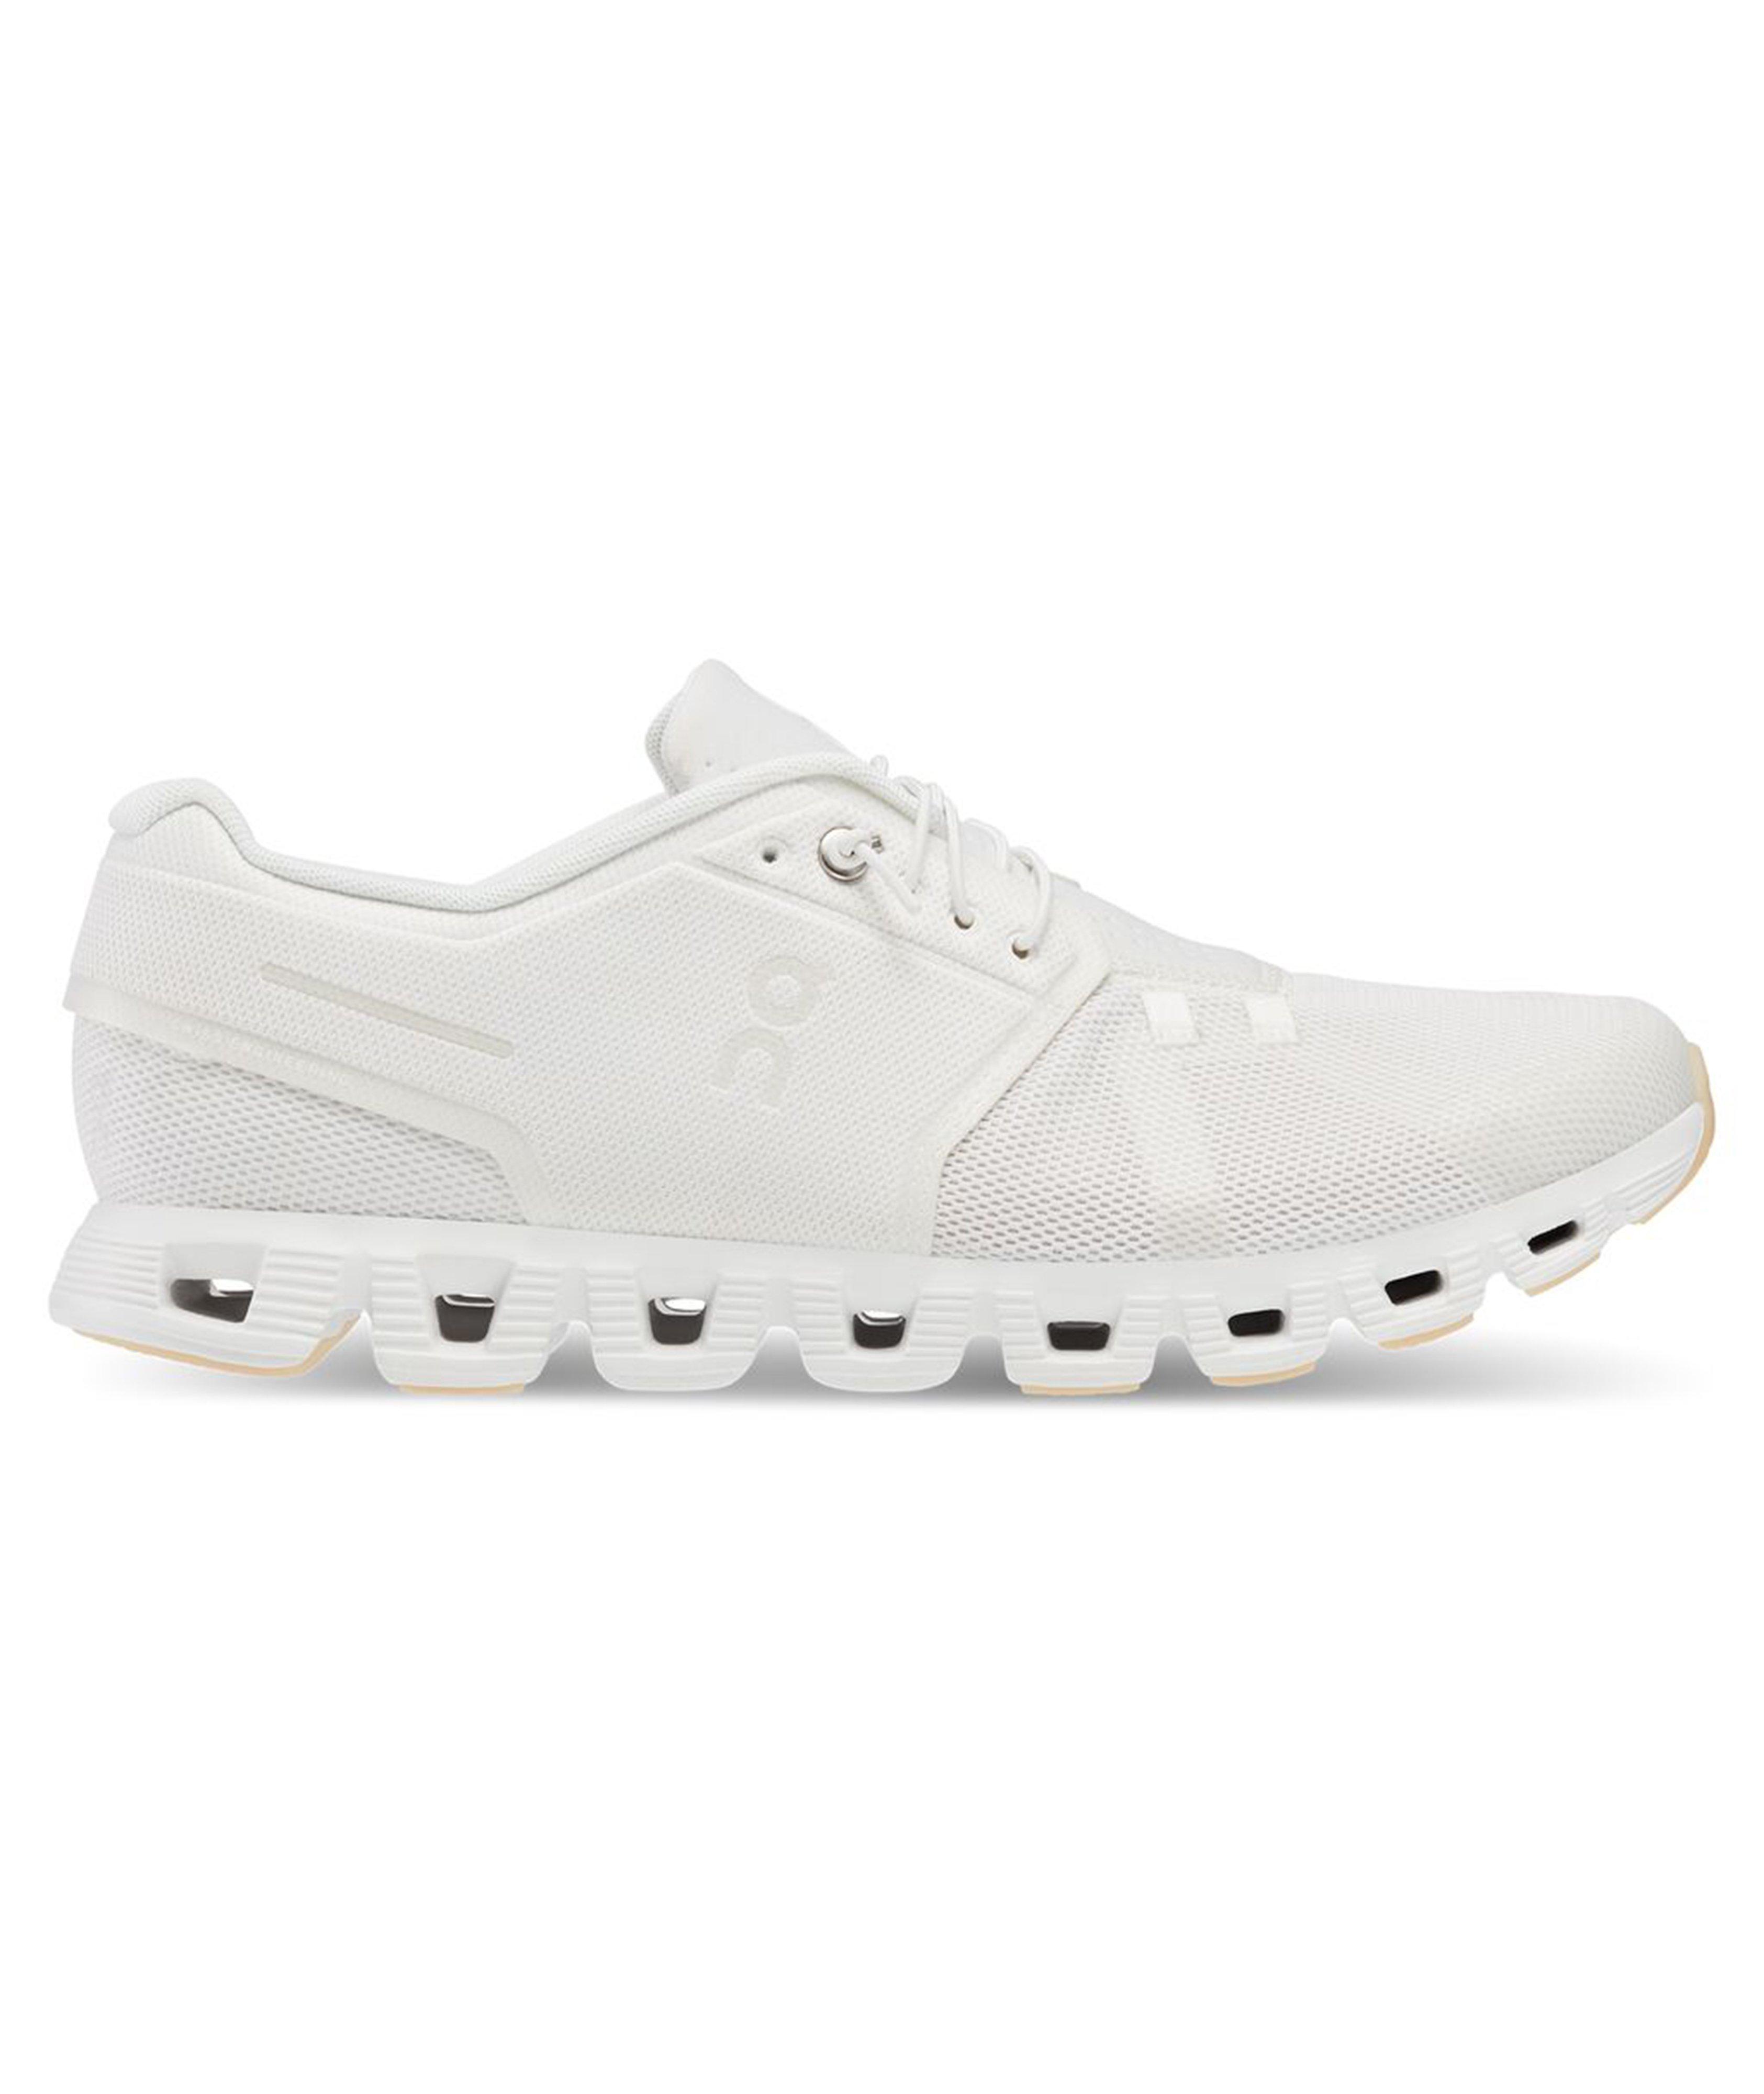 Cloud 5 Undyed Running Shoes image 0